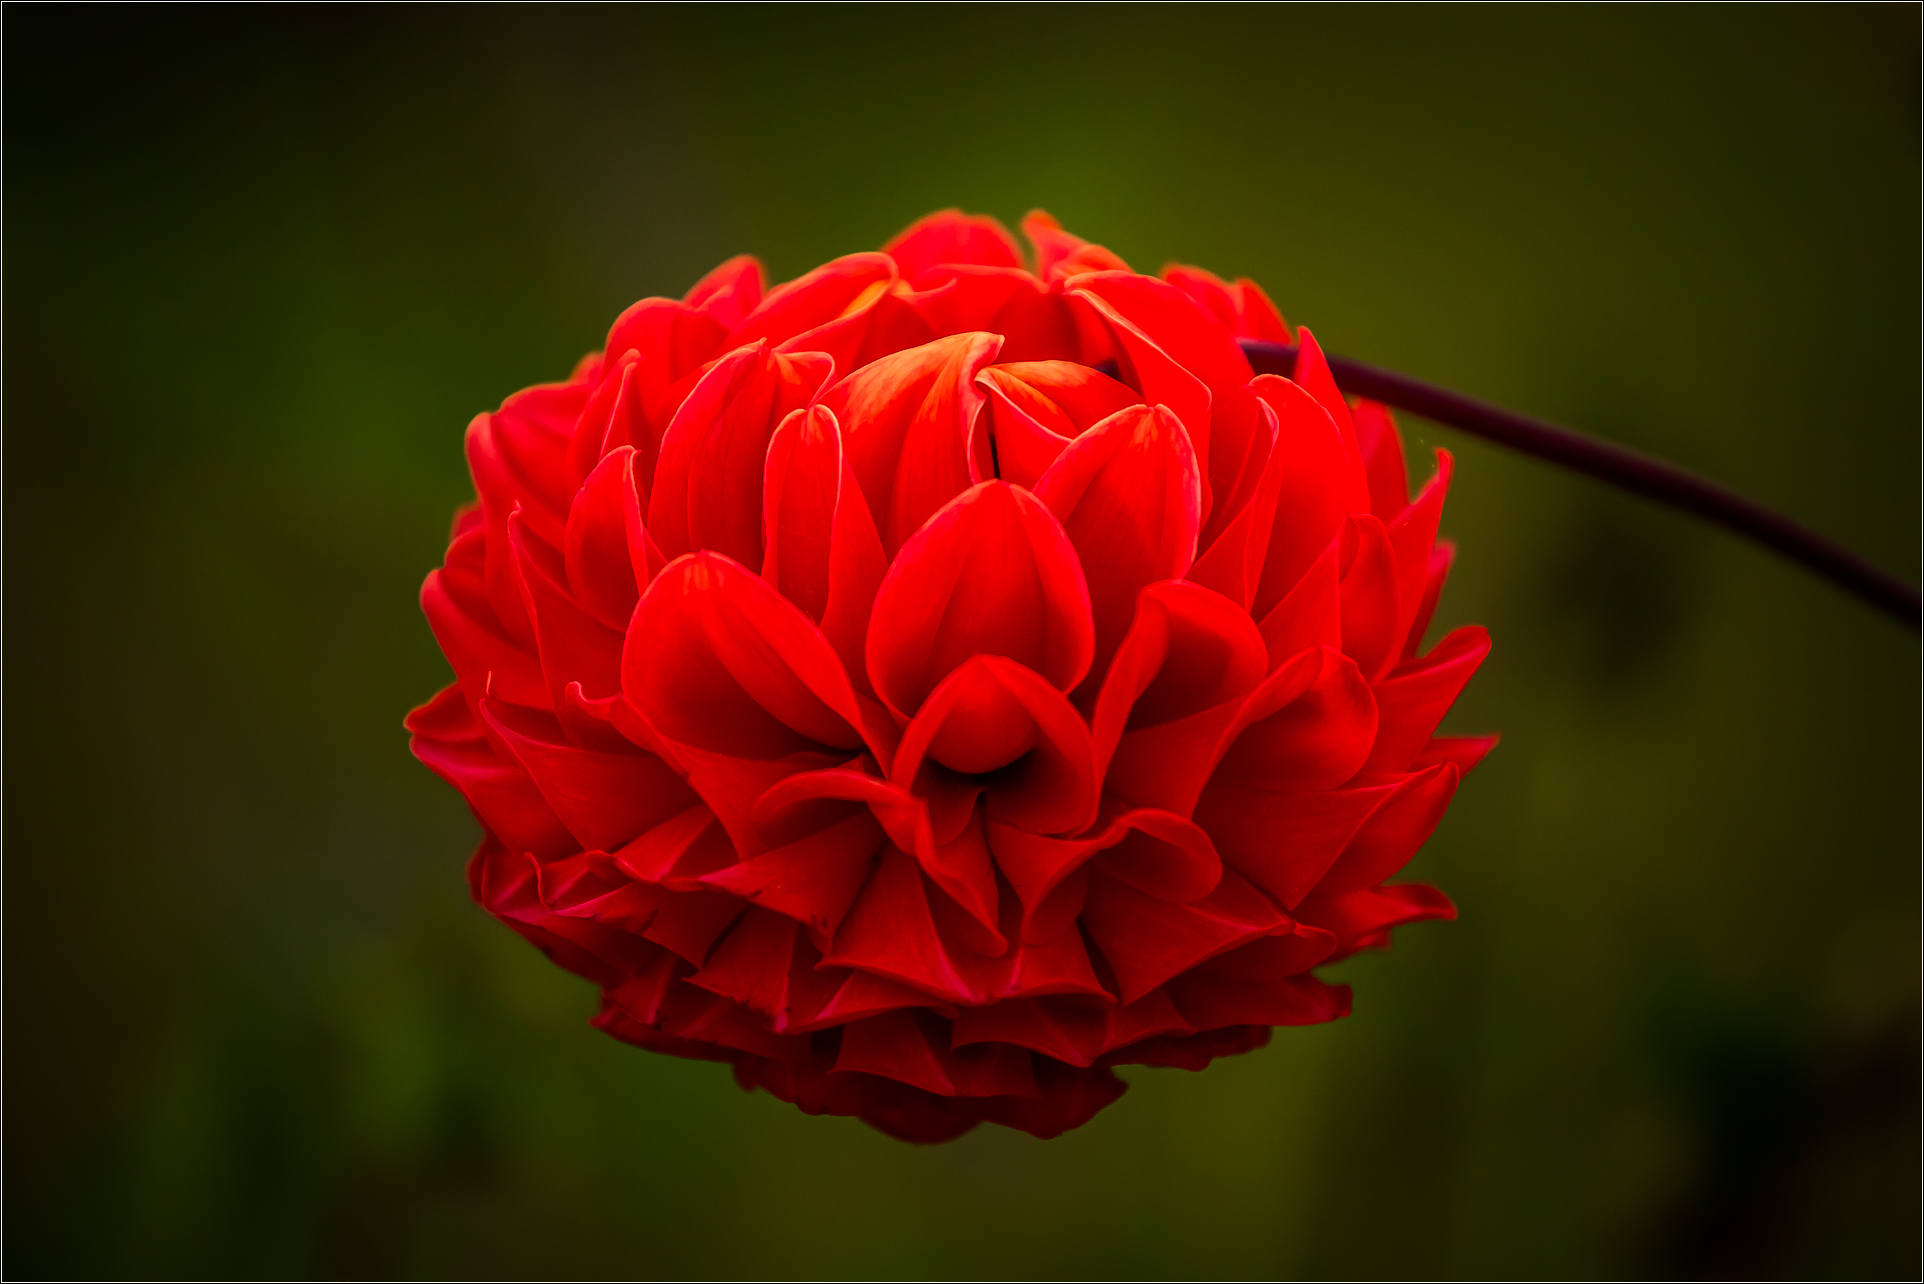 A flower from Yunnan | Christopher Martin Photography